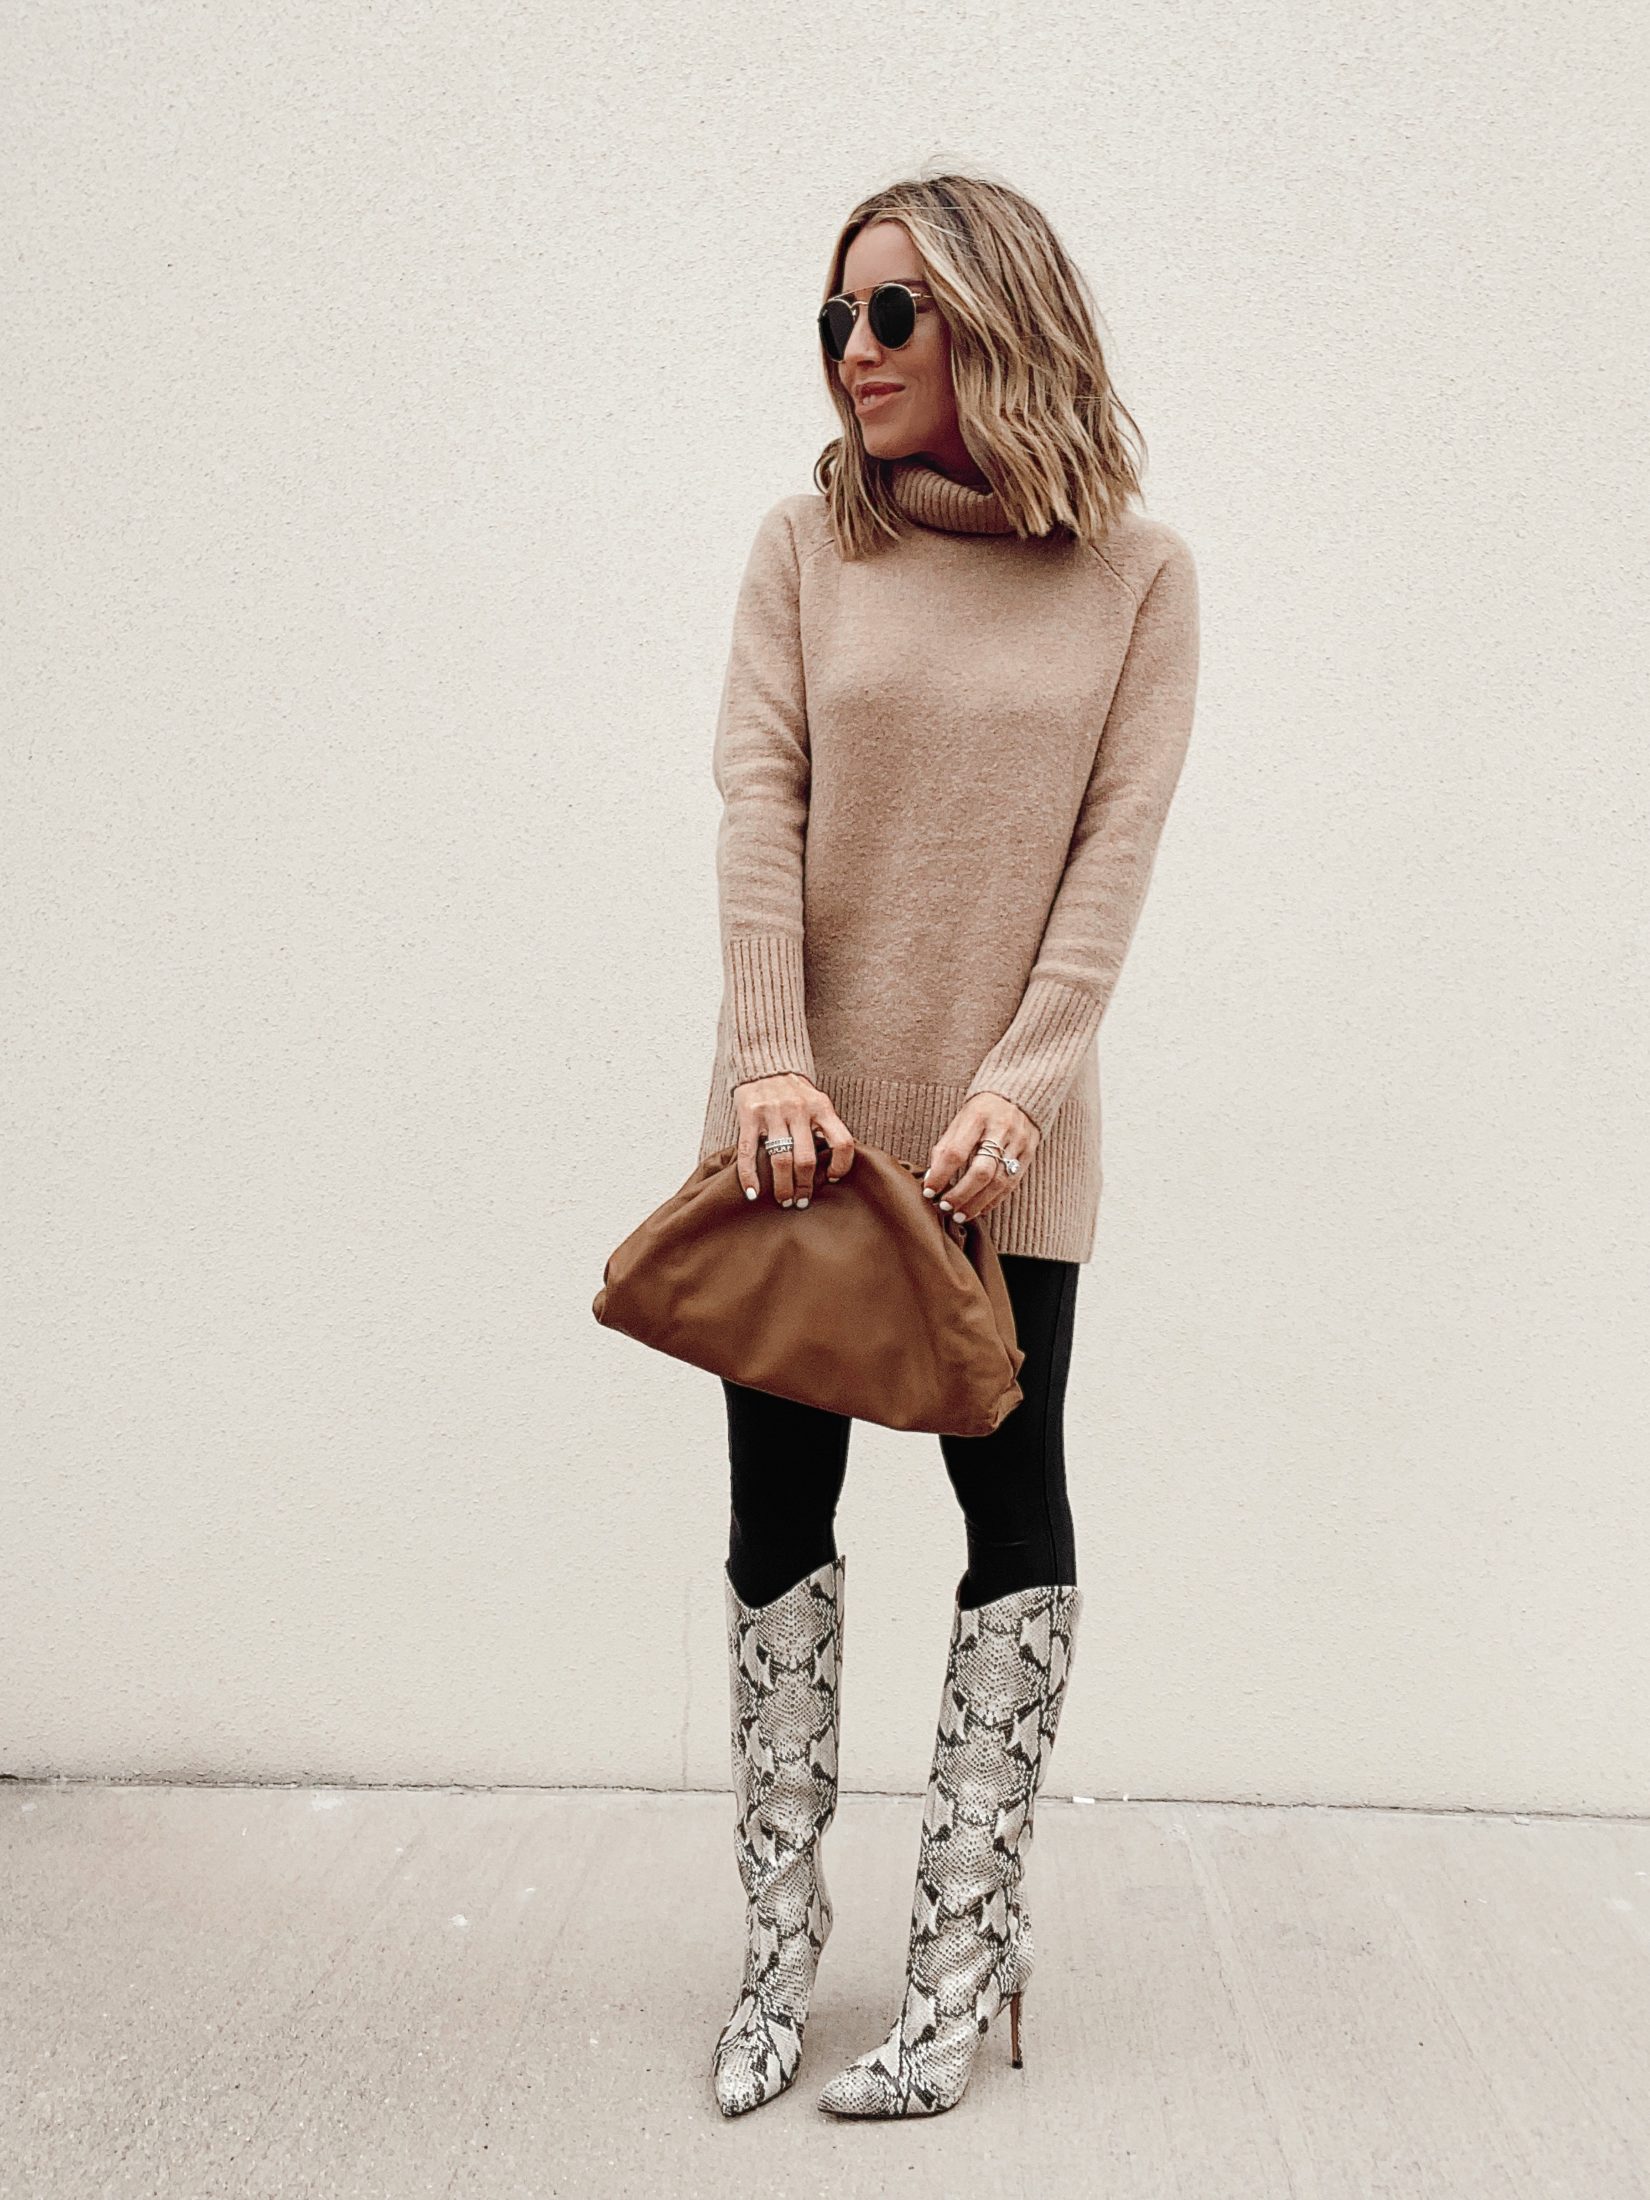 amazon turtleneck sweater with snakeskin knee high boots outfit